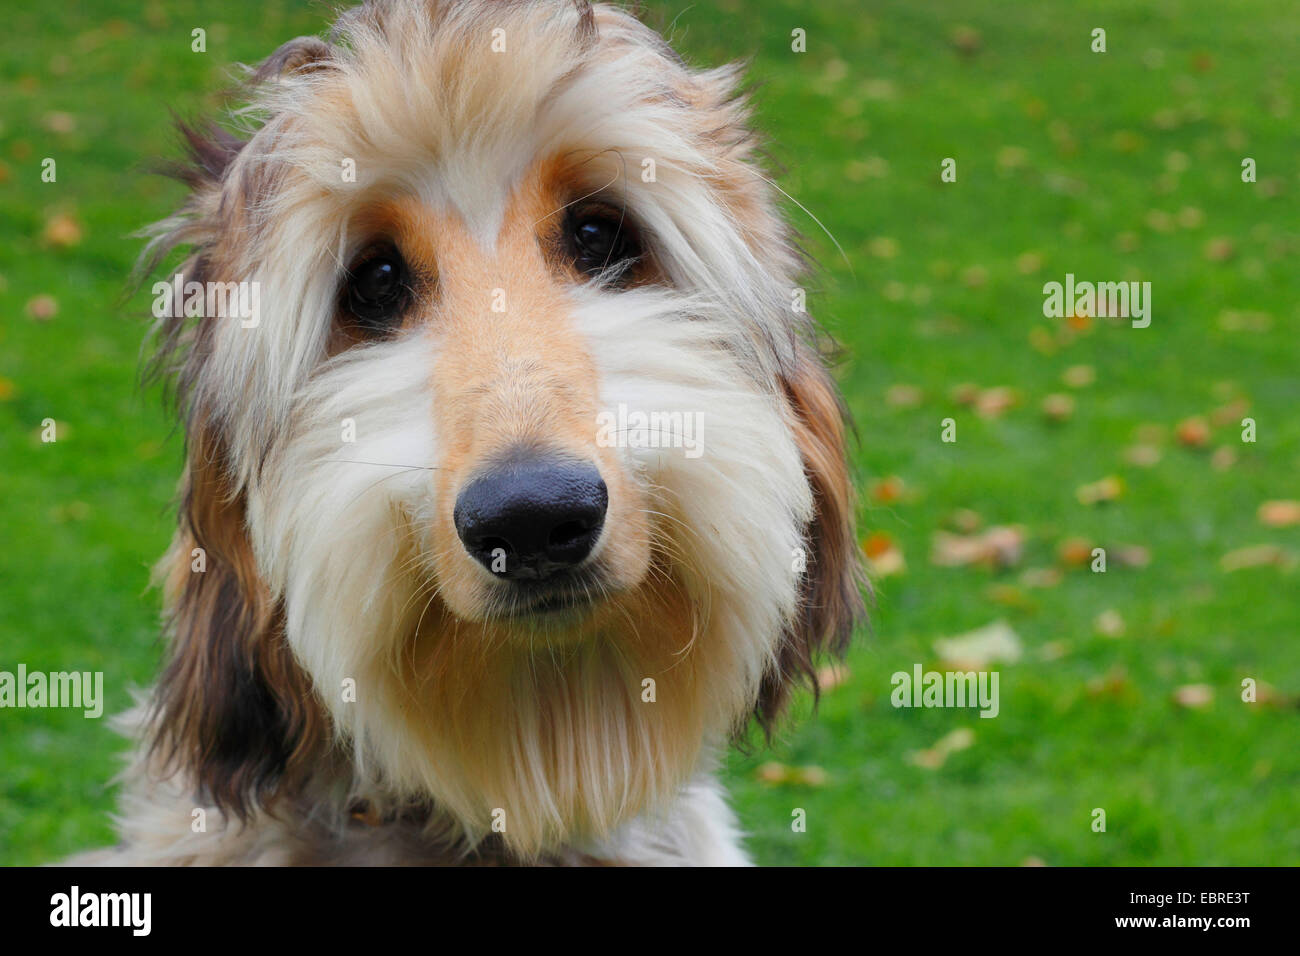 Afghanistan Hound, Afghan Hound (Canis lupus f. familiaris), six month old Afghan Hound Stock Photo